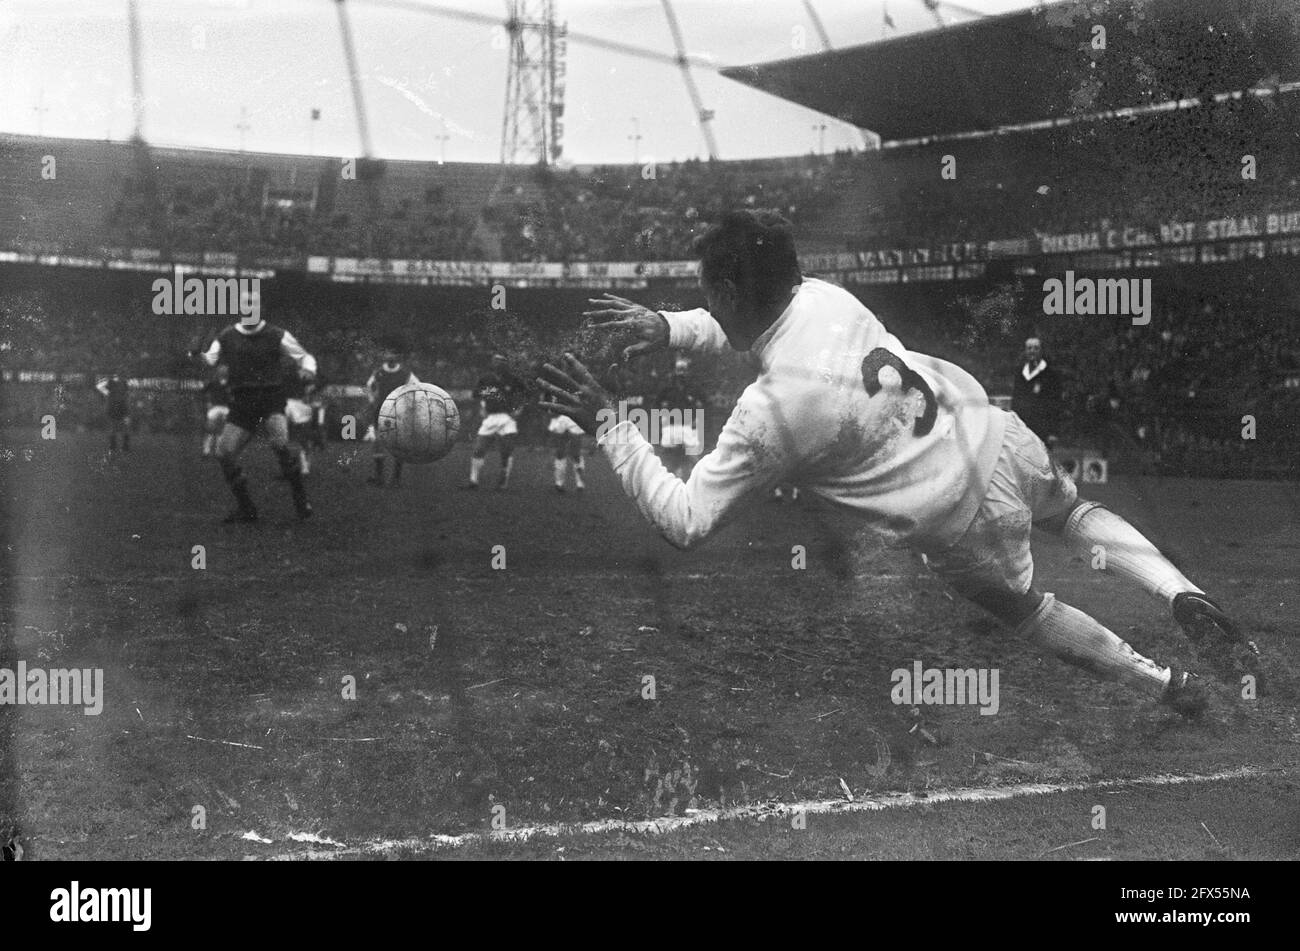 Feyenoord v NEC 2-0. Samardzic takes penalty, keeper De Bree stops, 7 January 1968, sports, soccer, The Netherlands, 20th century press agency photo, news to remember, documentary, historic photography 1945-1990, visual stories, human history of the Twentieth Century, capturing moments in time Stock Photo